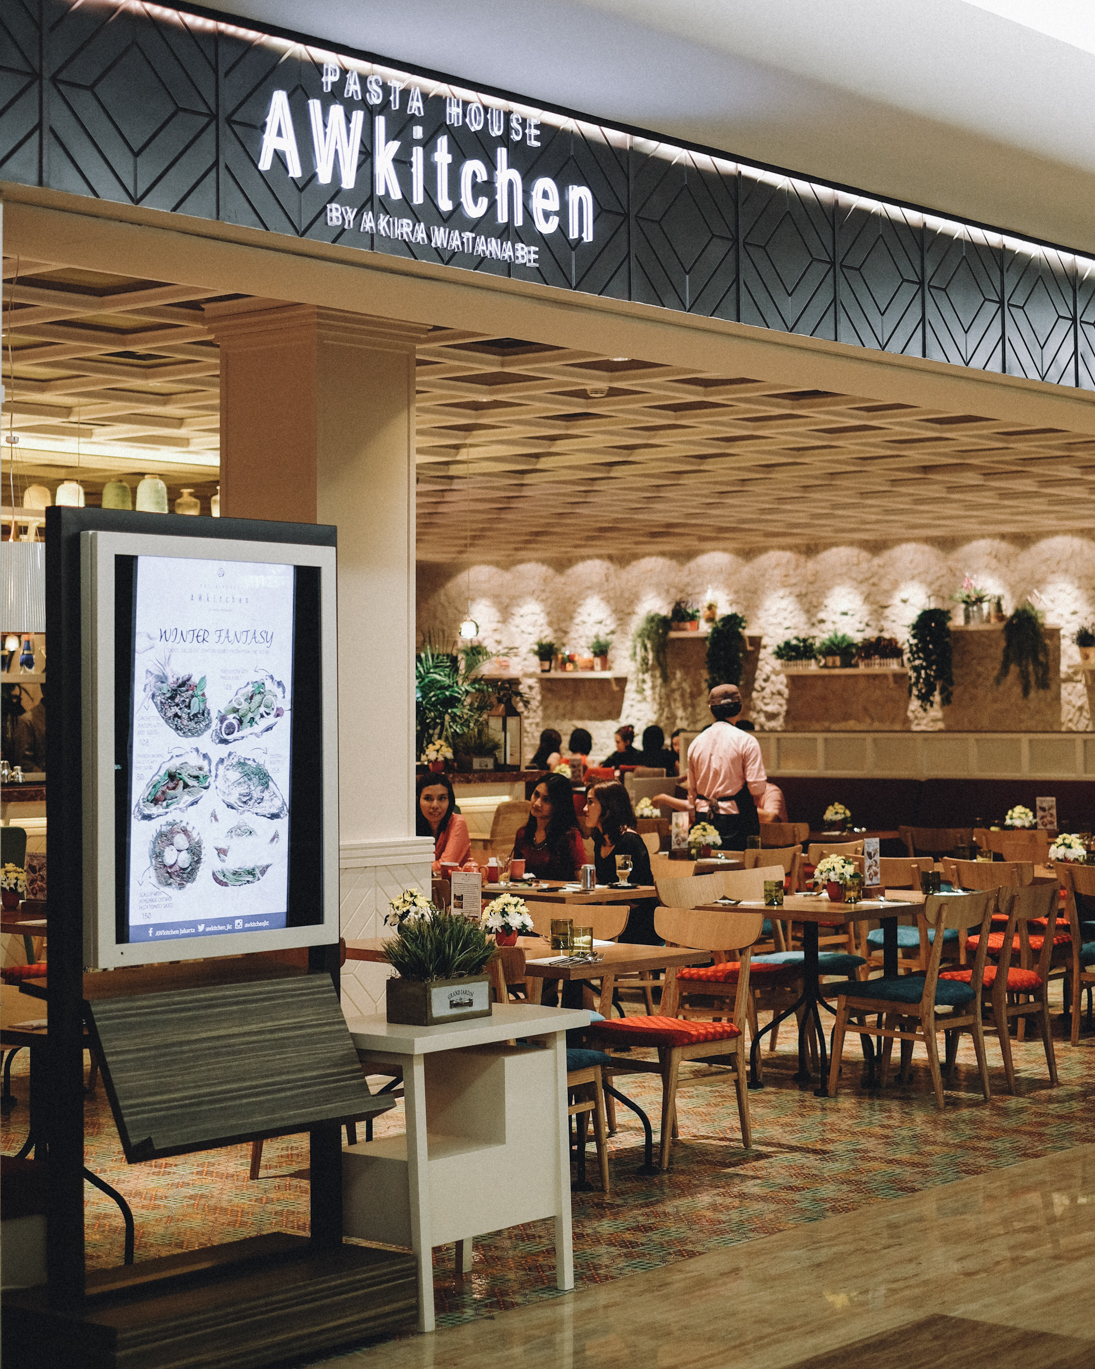 AW KITCHEN PLAZA INDONESIA - eatandtreats - Indonesian Food and Travel